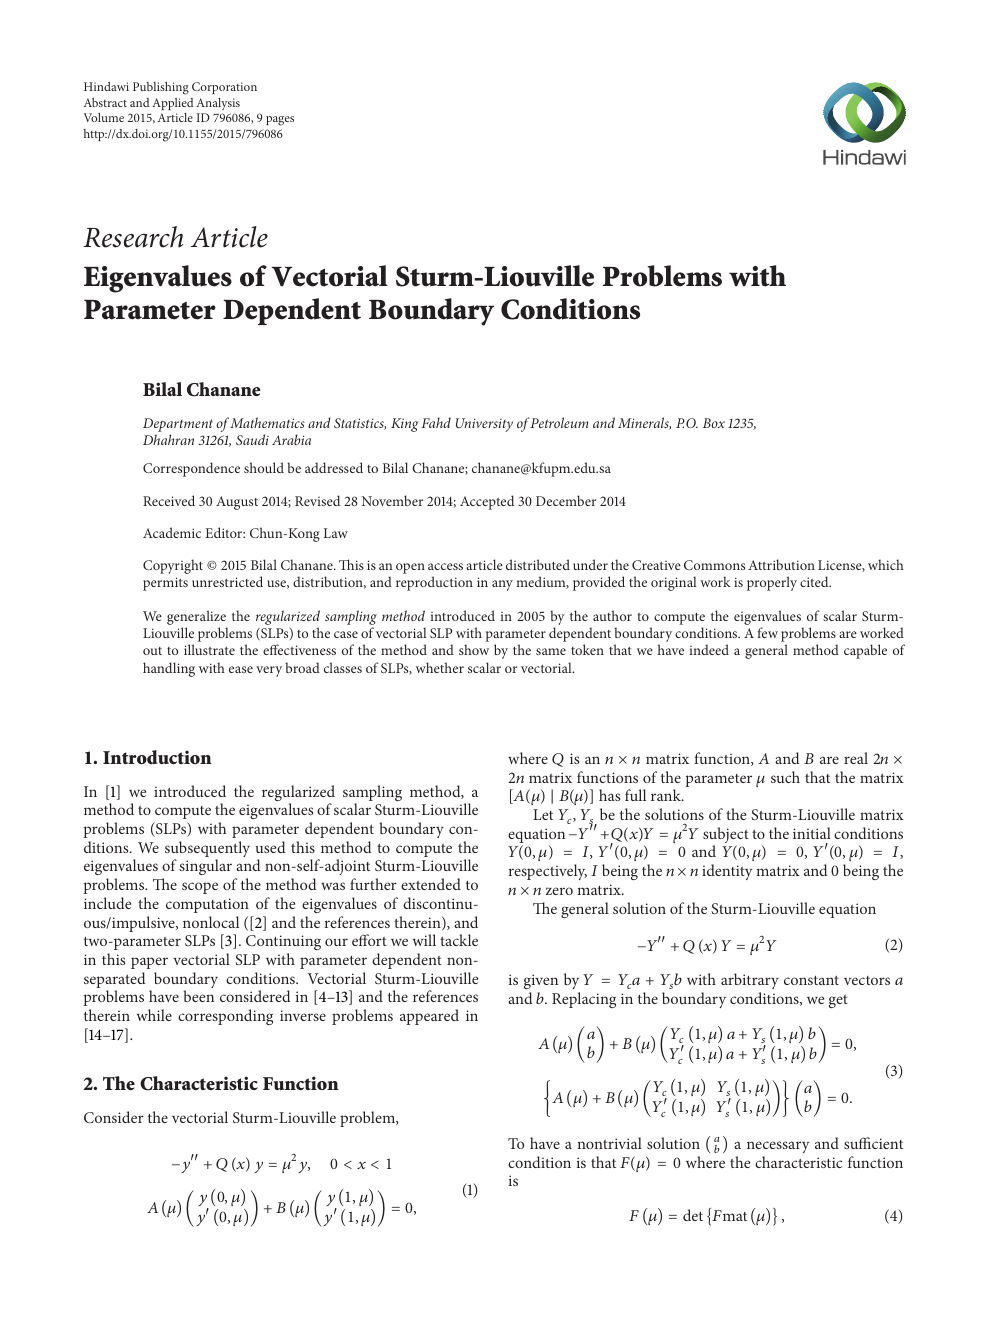 Eigenvalues Of Vectorial Sturm Liouville Problems With Parameter Dependent Boundary Conditions Topic Of Research Paper In Mathematics Download Scholarly Article Pdf And Read For Free On Cyberleninka Open Science Hub